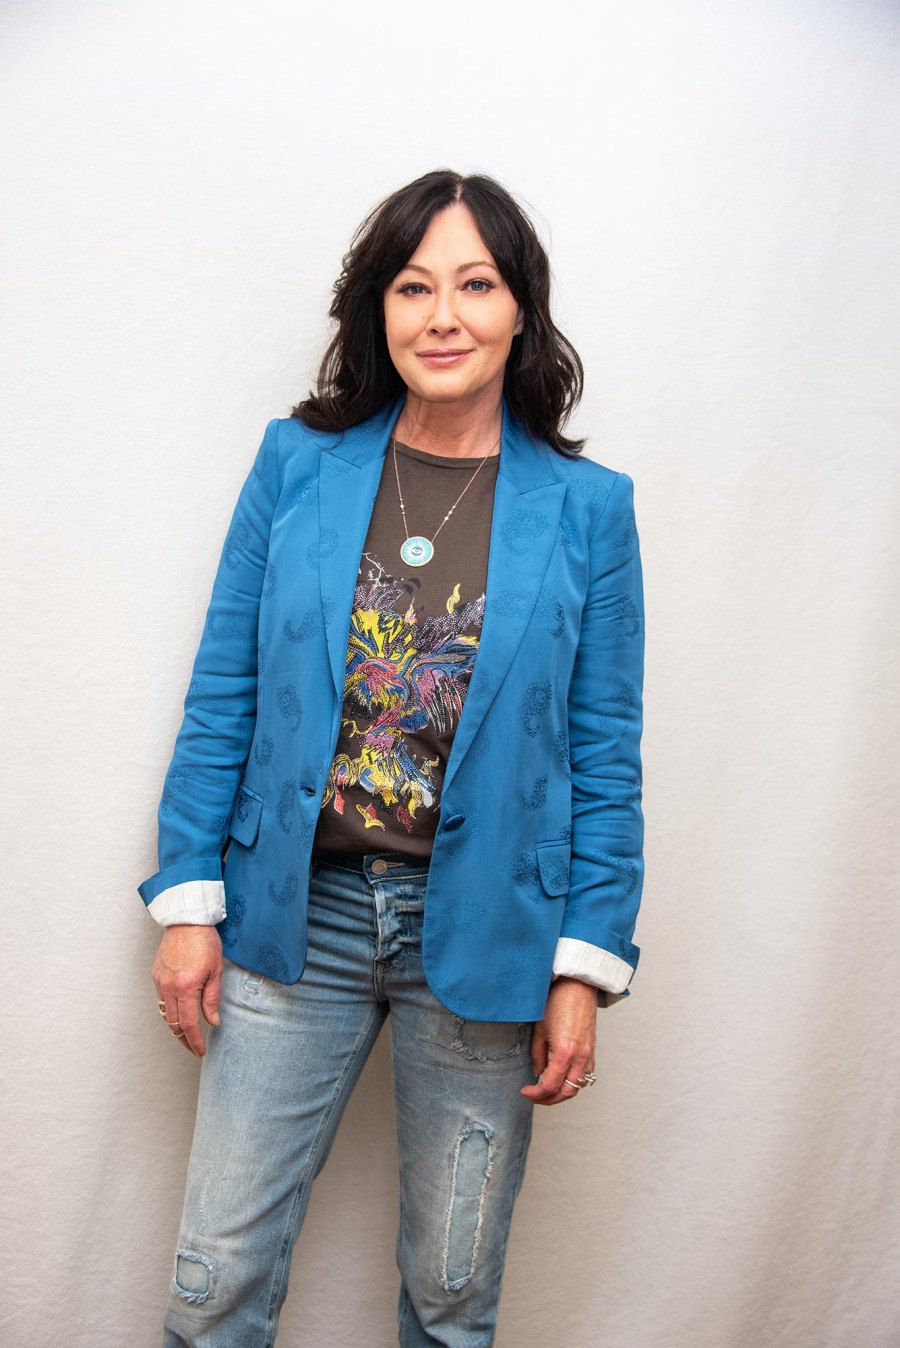 Shannen Doherty Says Current Cancer Treatment Has Resulted in a Miracle Hope Is Always There